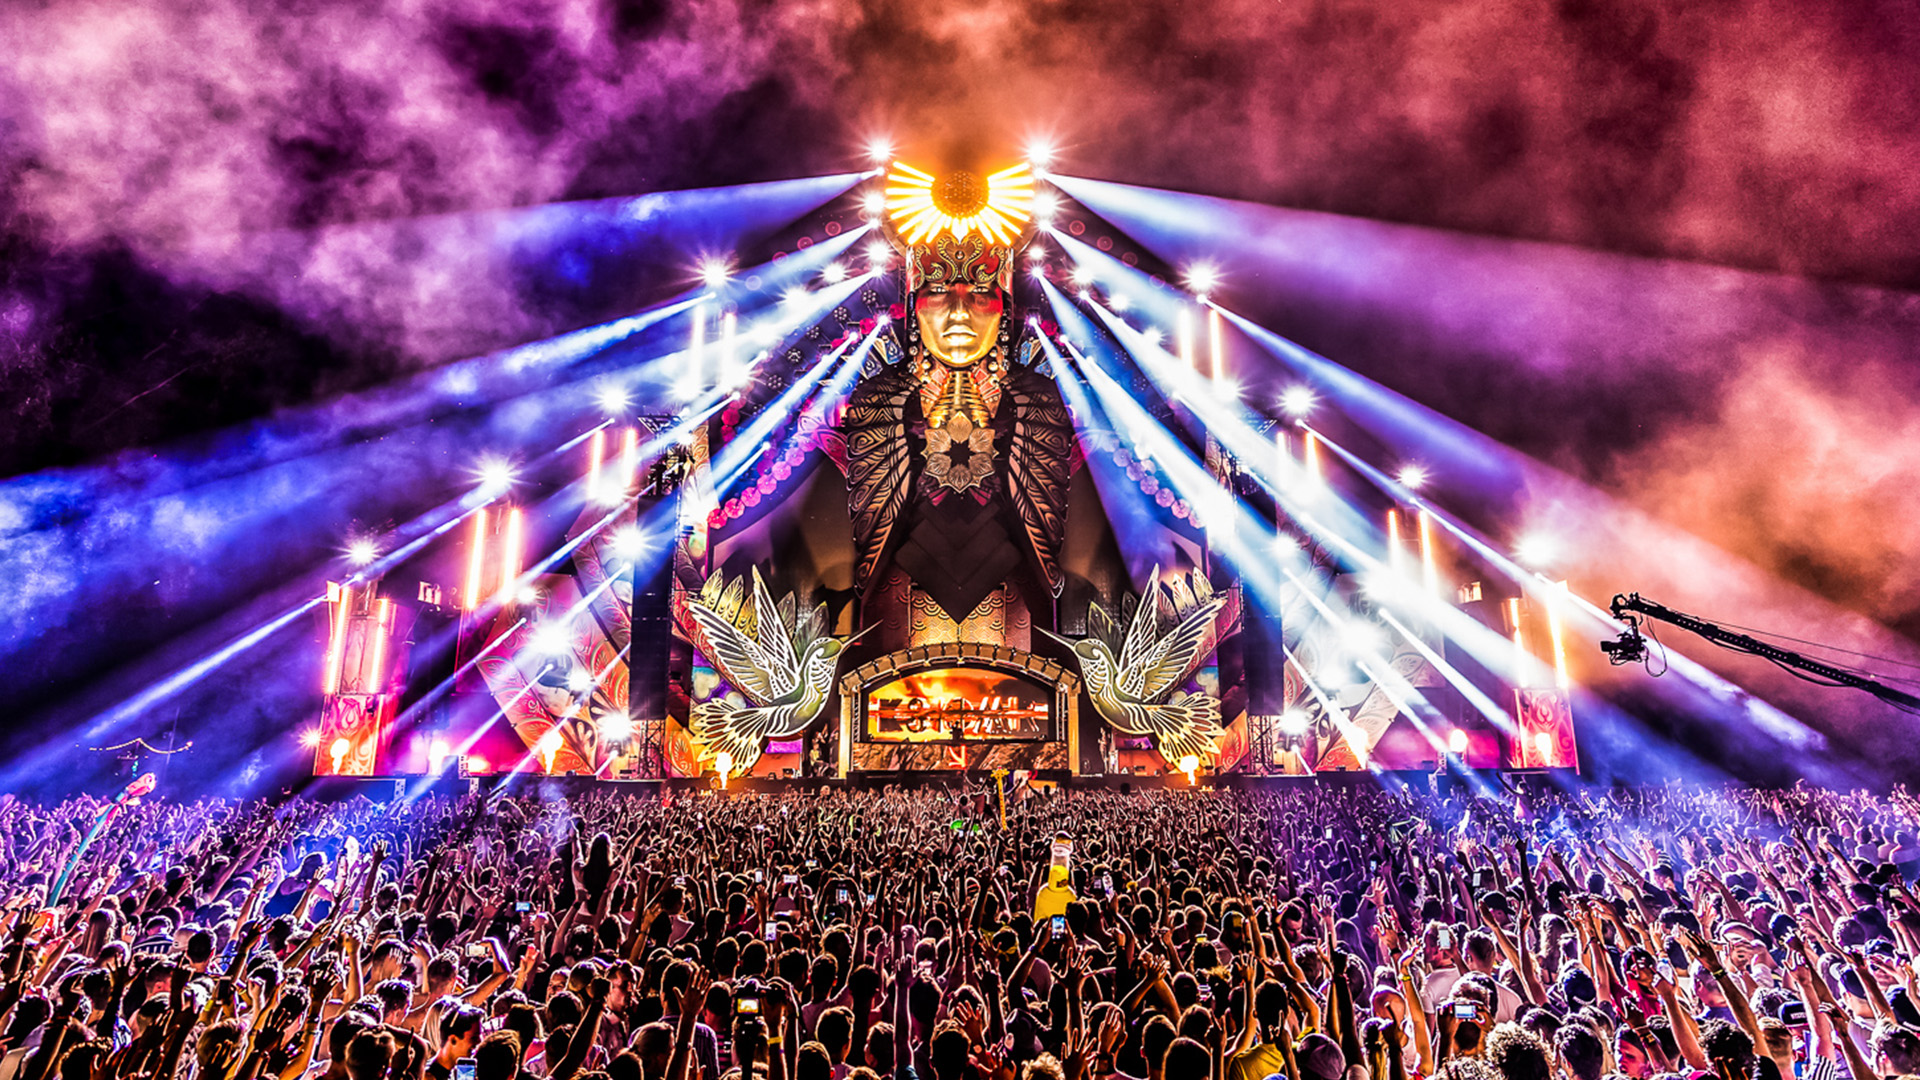 Mysteryland will be taking place this summer 2